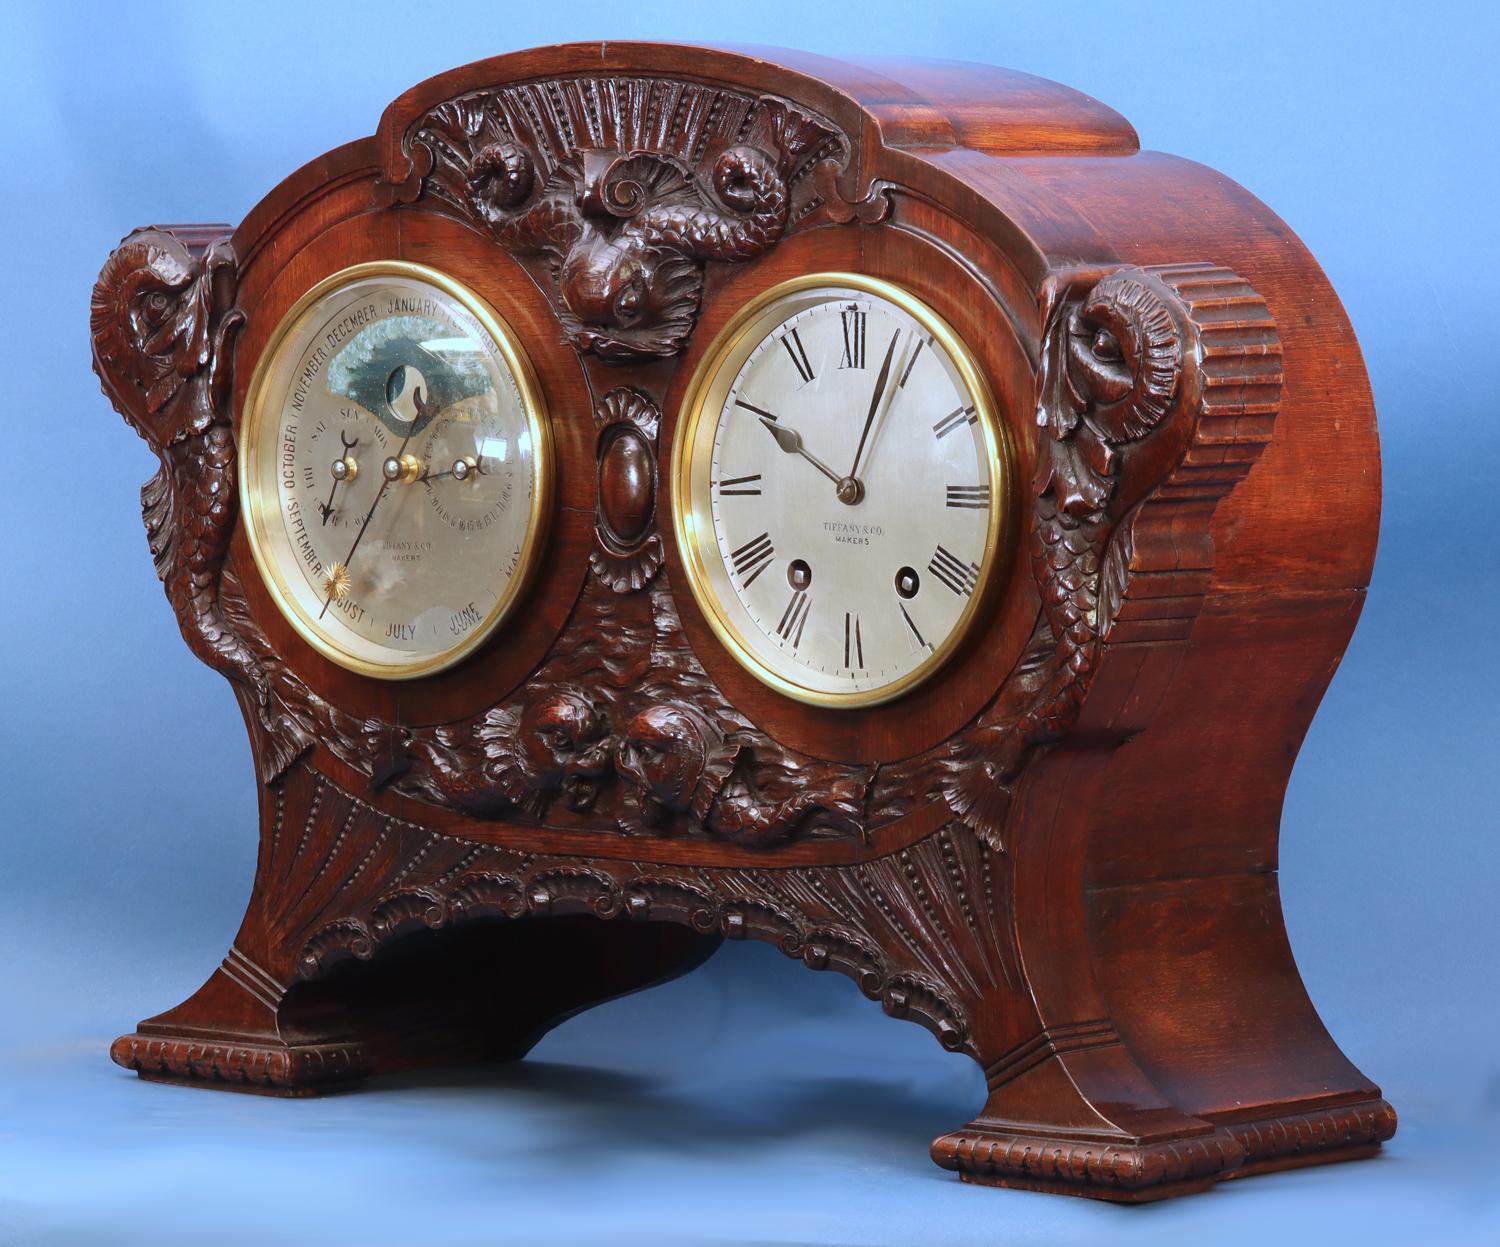 20th Century c.1910 Rare Double Dial Clock with Perpetual Calendar by Tiffany & Co., Makers.